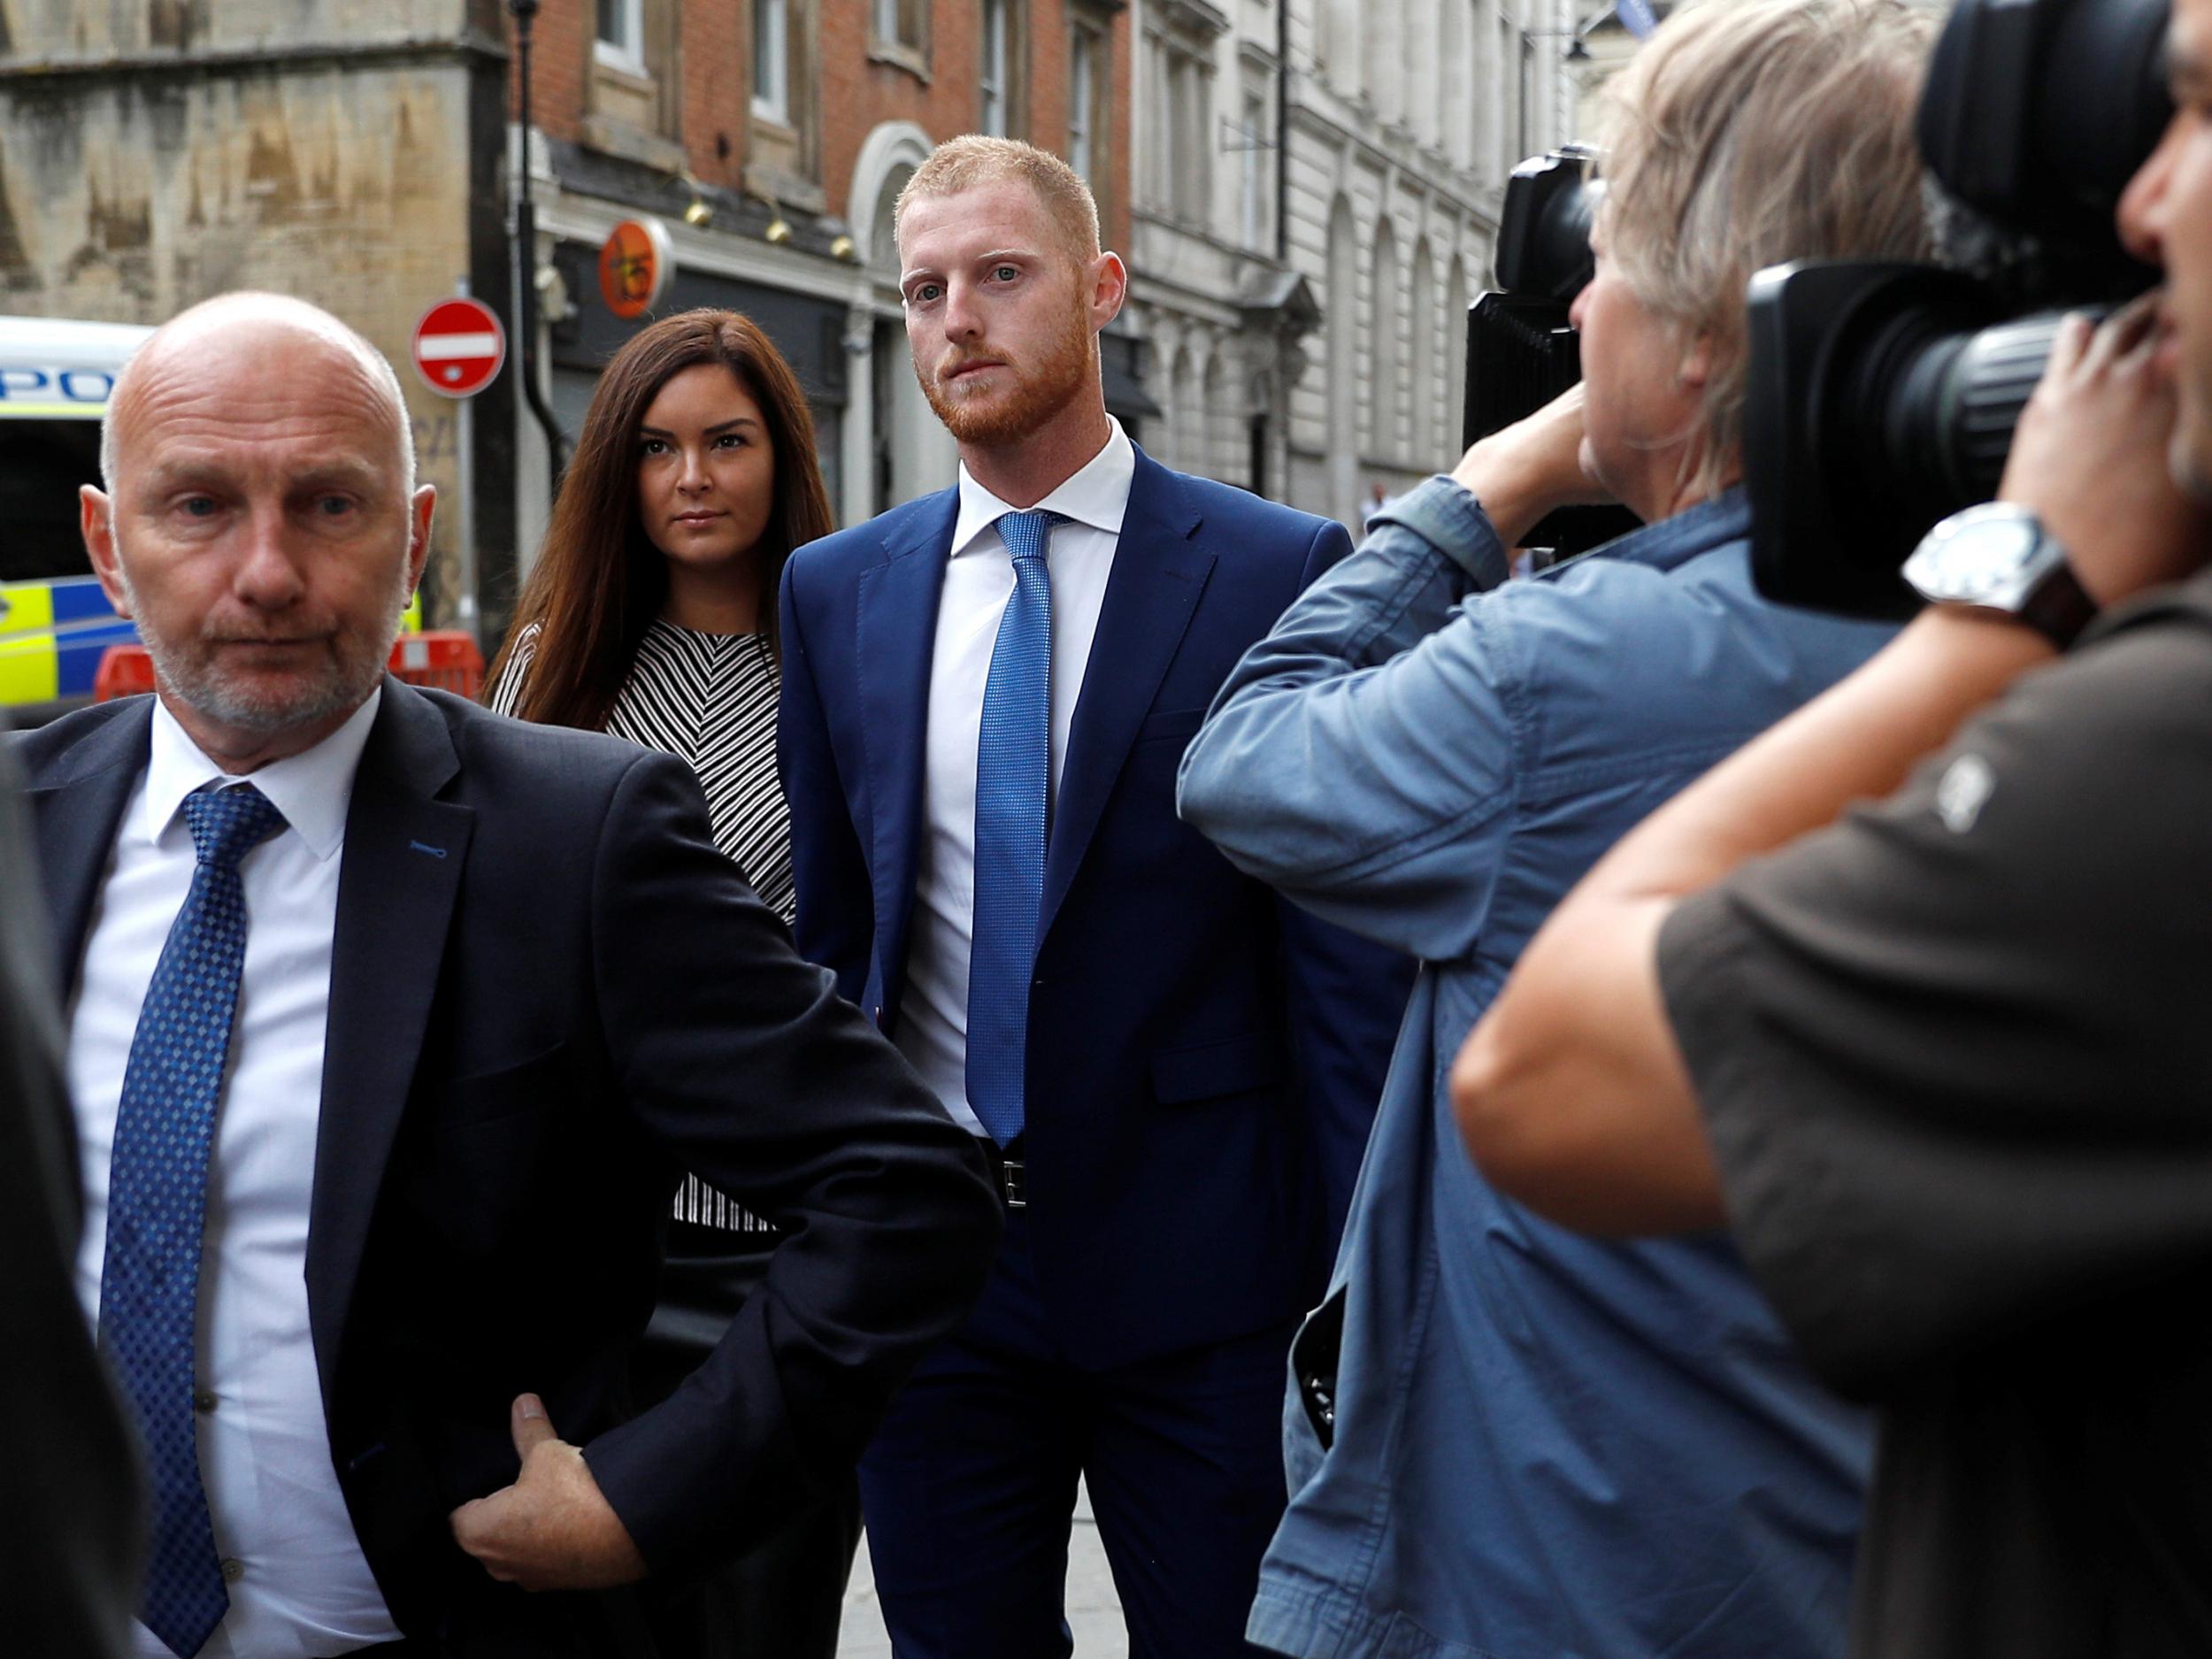 England cricket player Ben Stokes and his wife Clare Ratcliffe arrive at Bristol Crown Court with his legal team, in Bristol, Britain, August 9, 2018